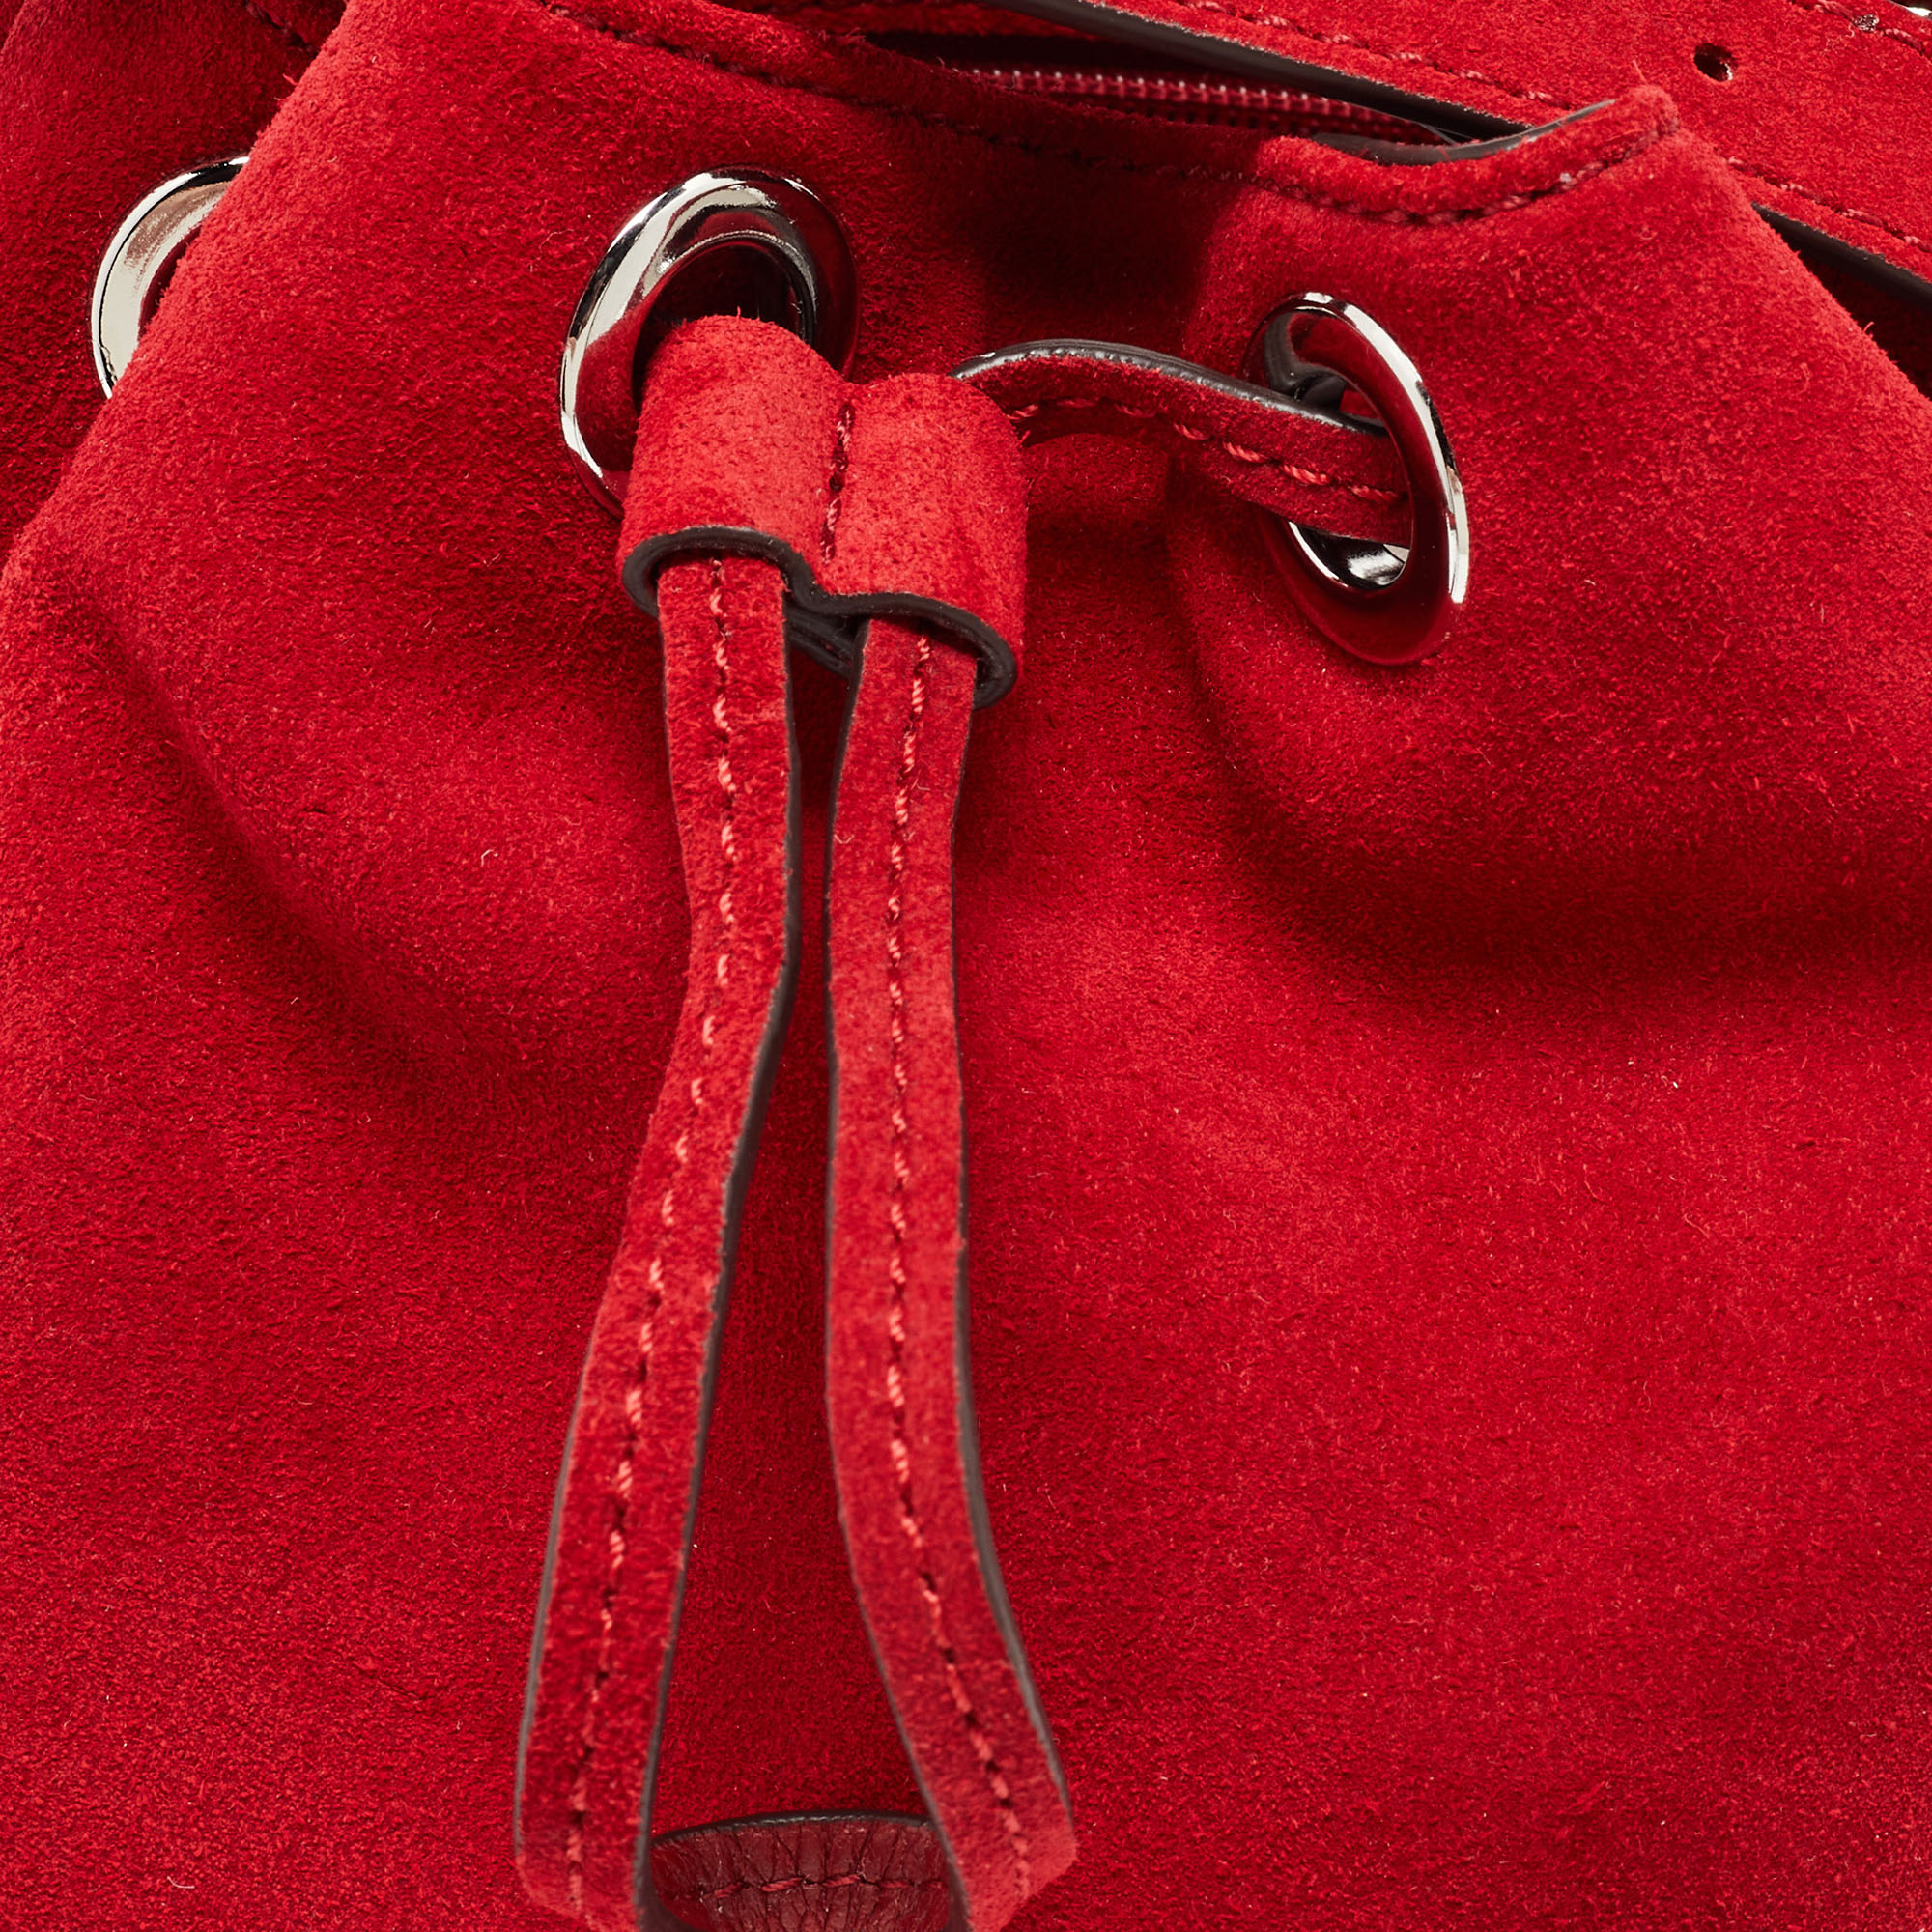 Michael Kors Red Suede And Leather Frankie Drawstring Bag